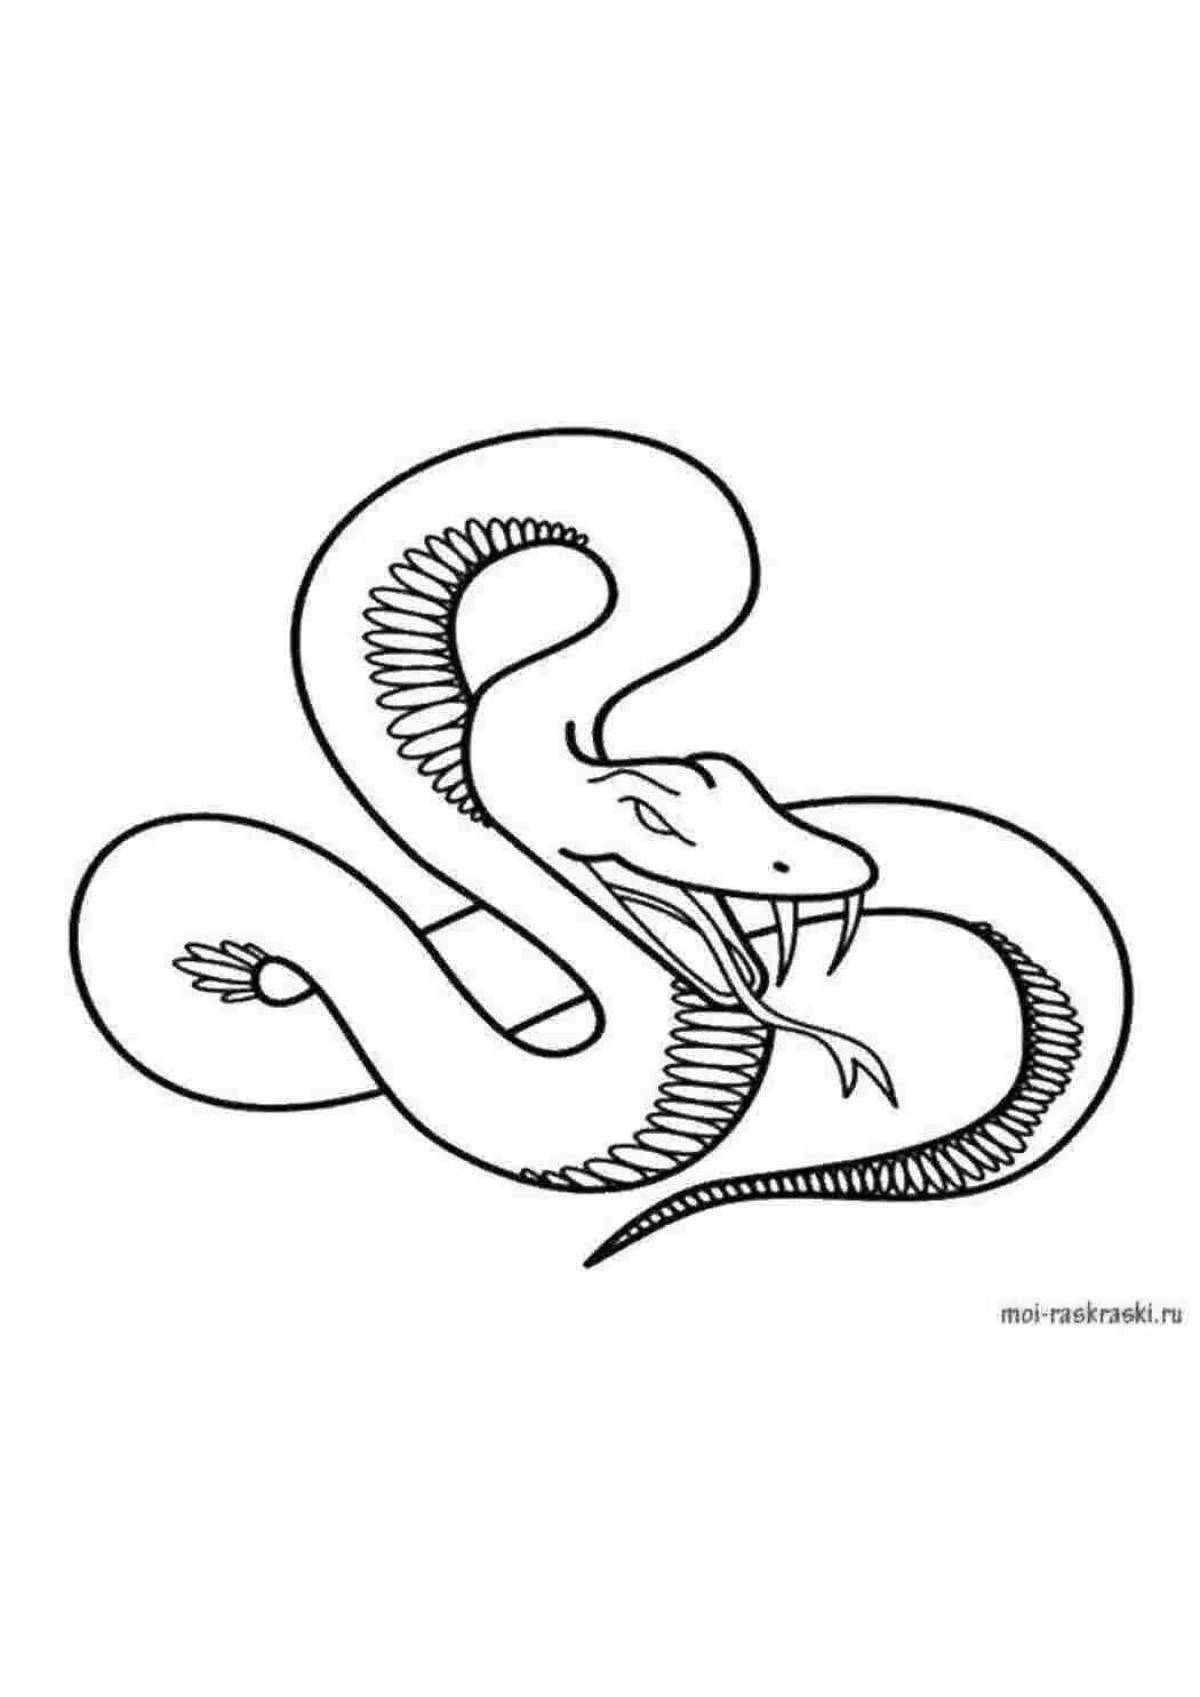 Intricate cobra coloring page for kids